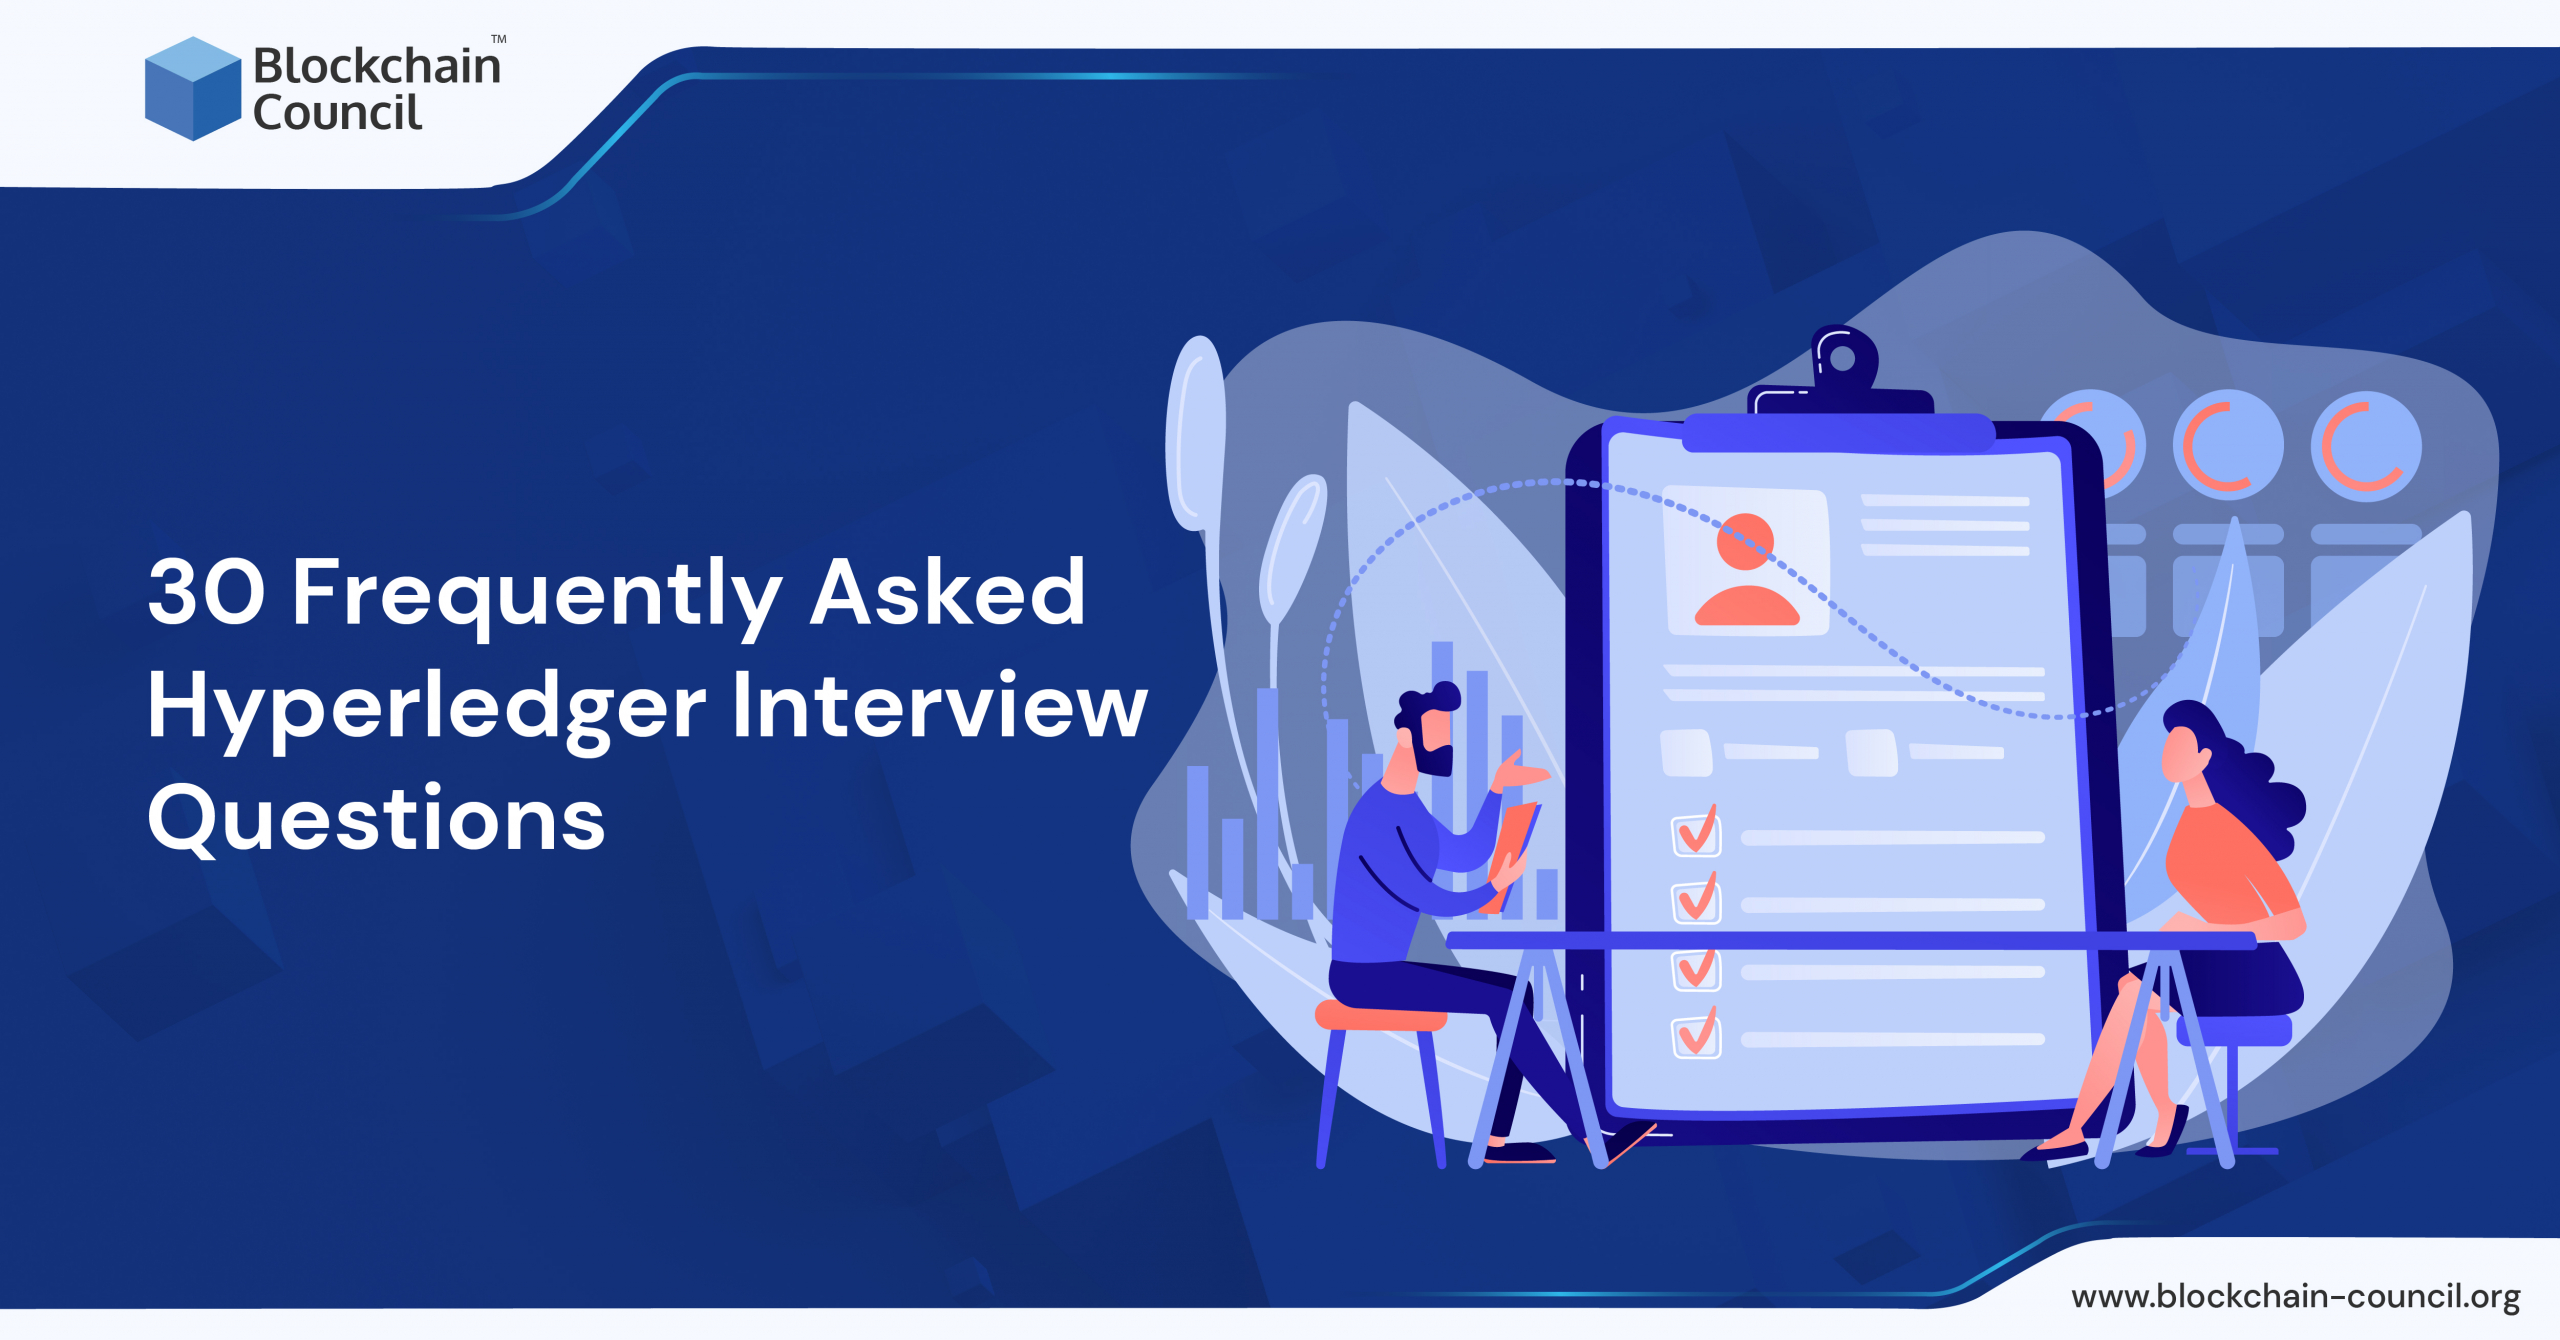 30 Frequently Asked Hyperledger Interview Questions